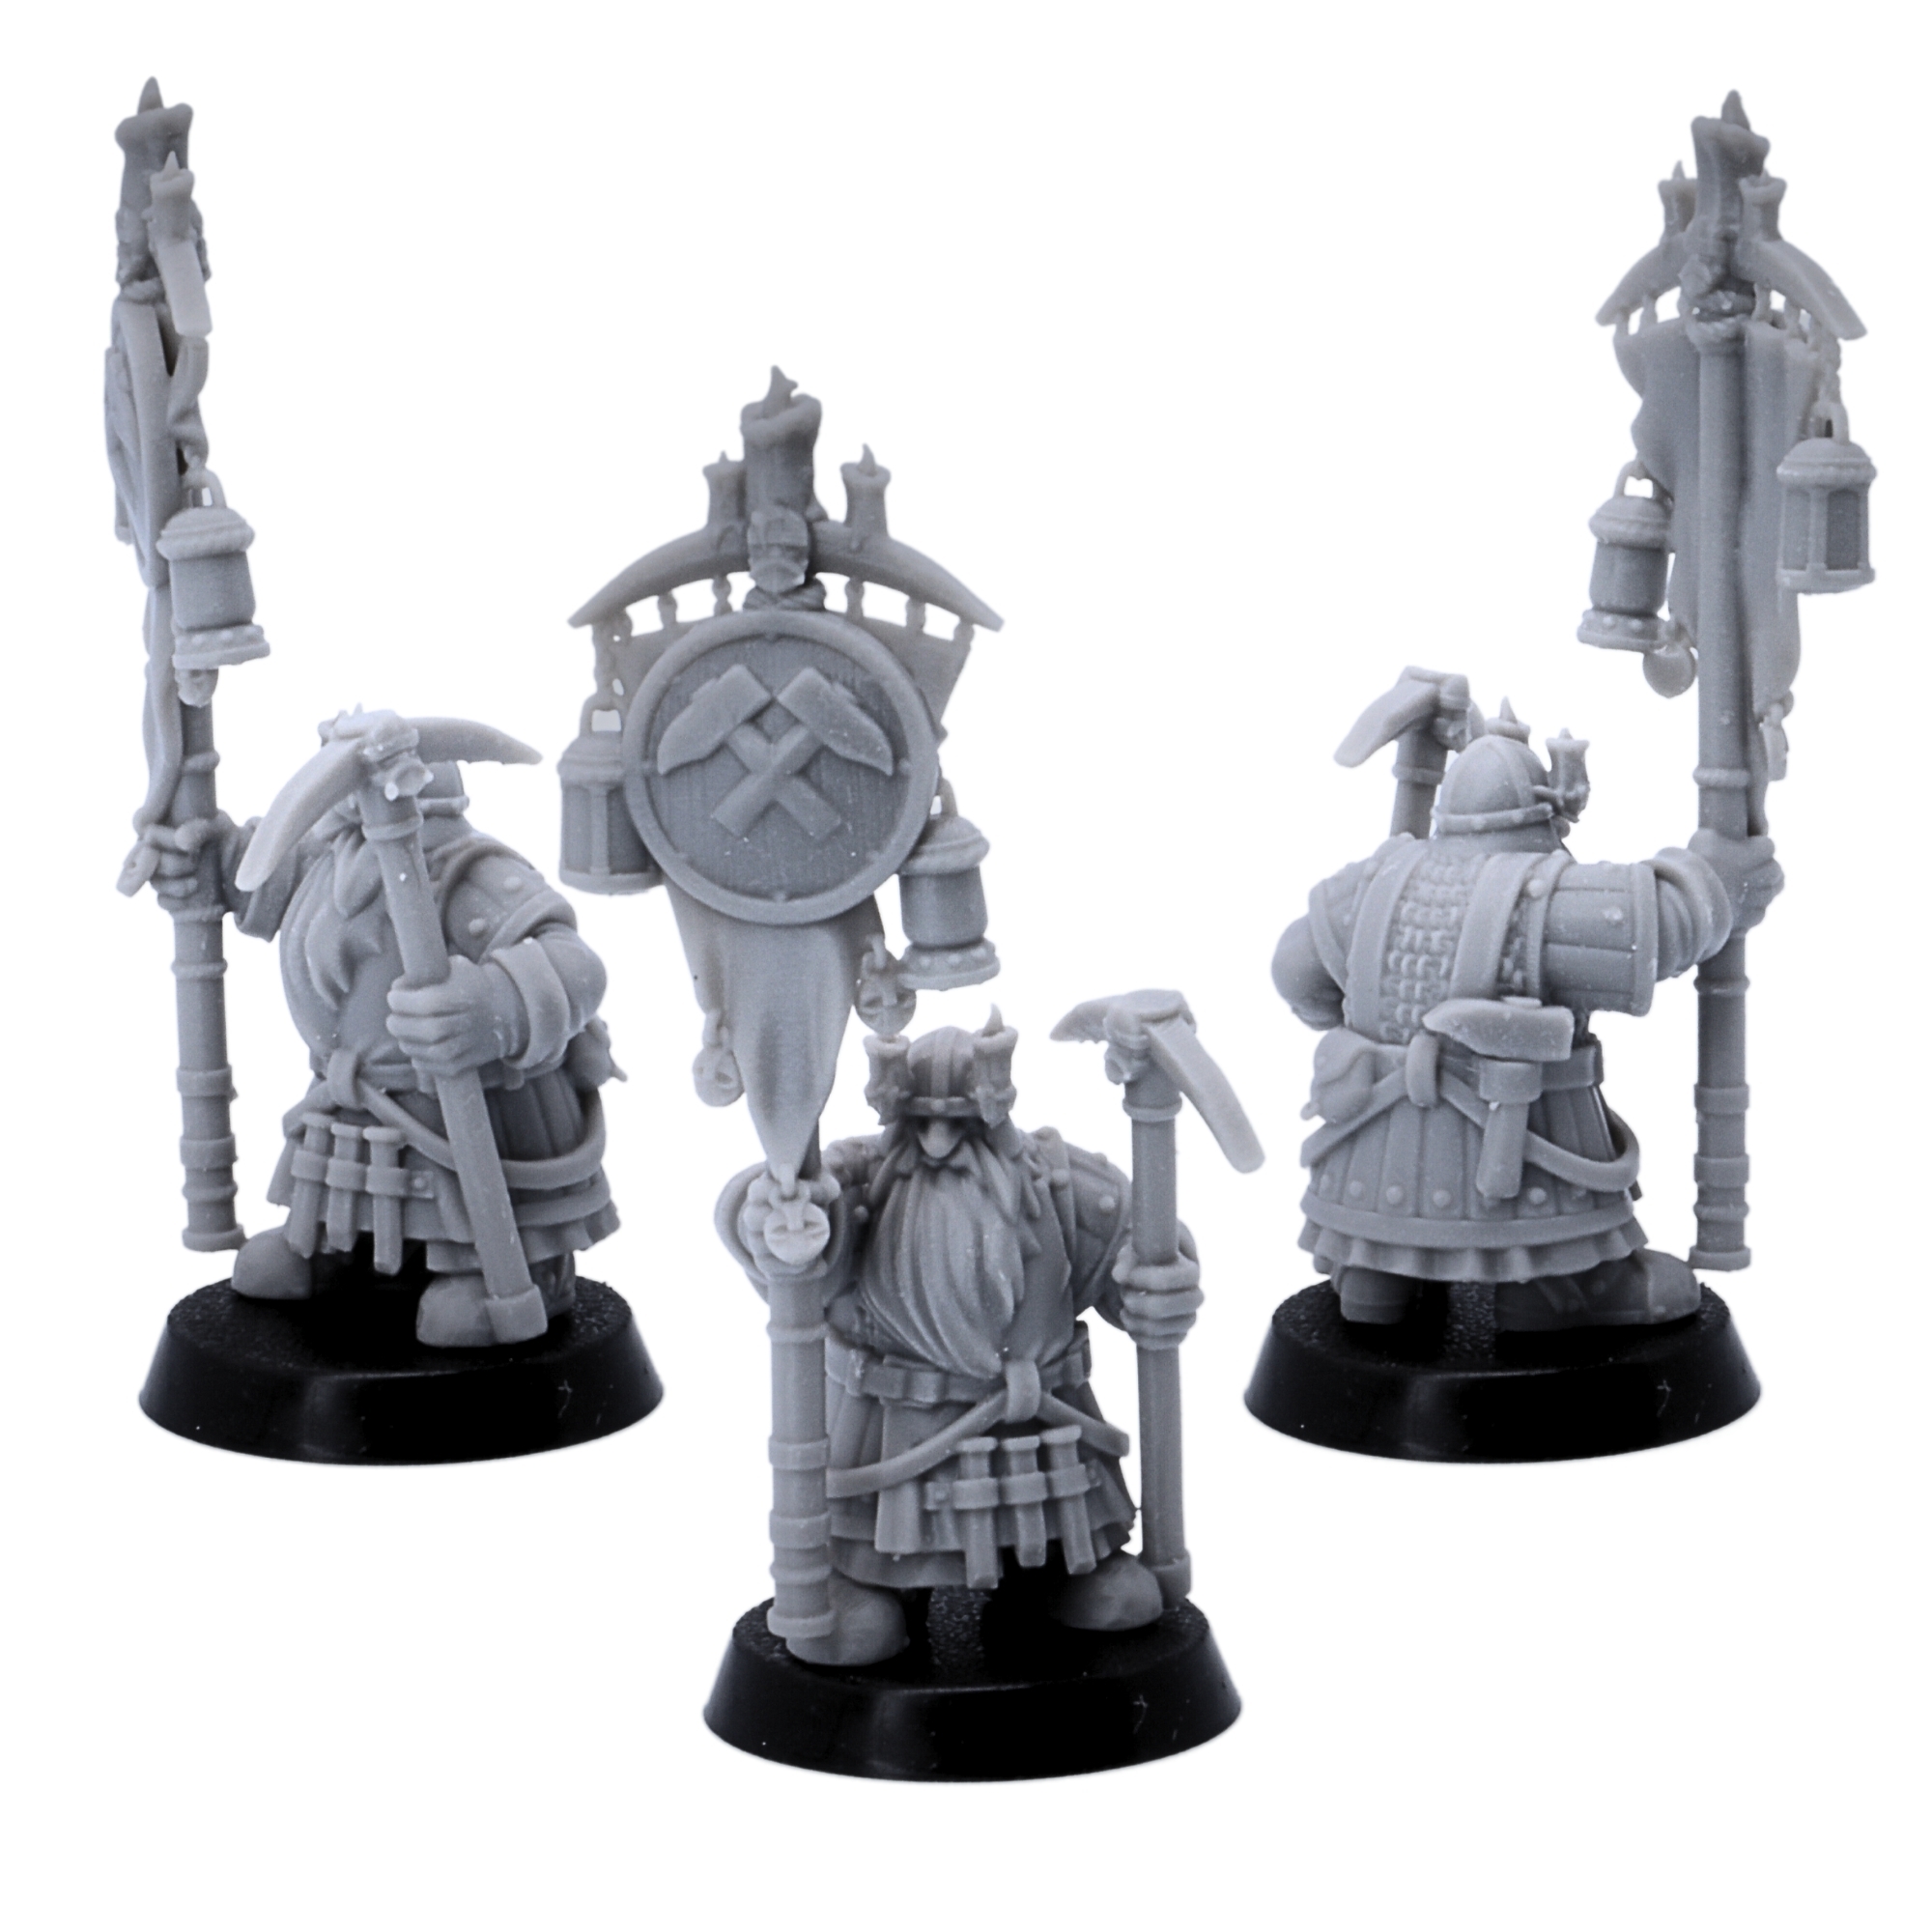 Dwarf Miners Collectible Figures